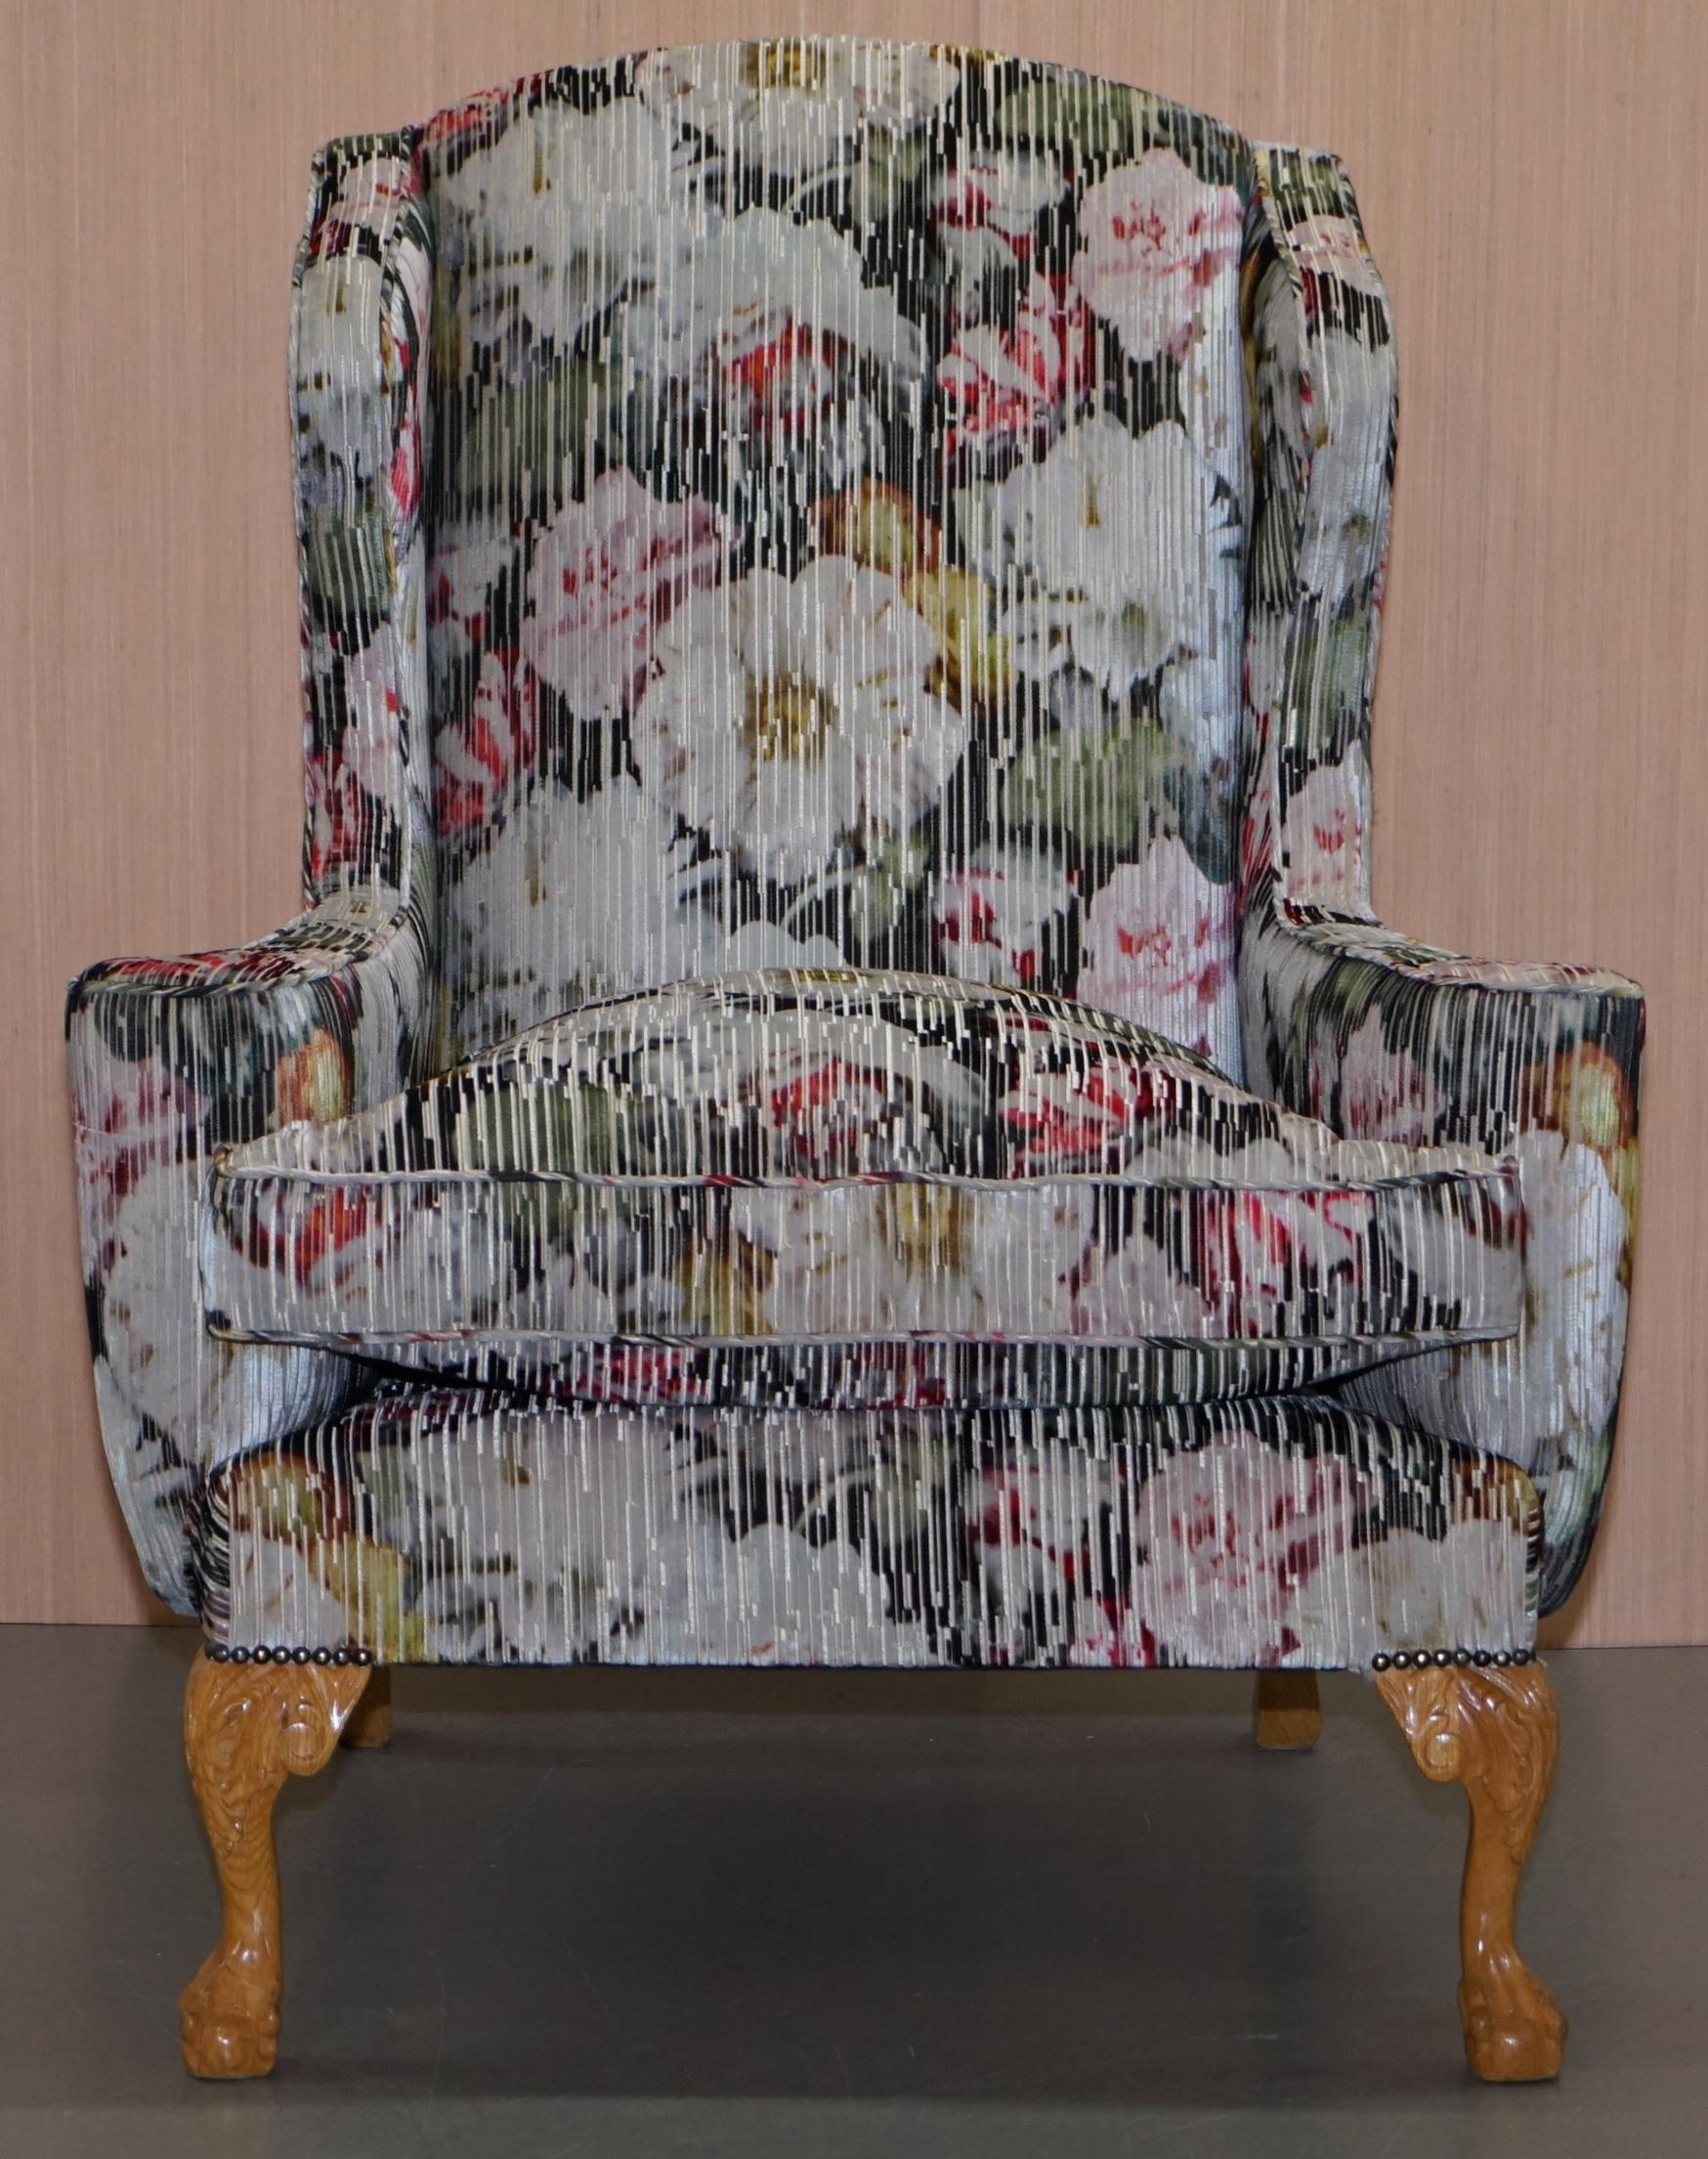 We are delighted to offer for sale this stunning Sinclair Matthews Newport model large wingback armchair with solid oak frame and floral upholstery

A very good looking and well made large chair with expertly carved Claw & Ball feet in solid oak.